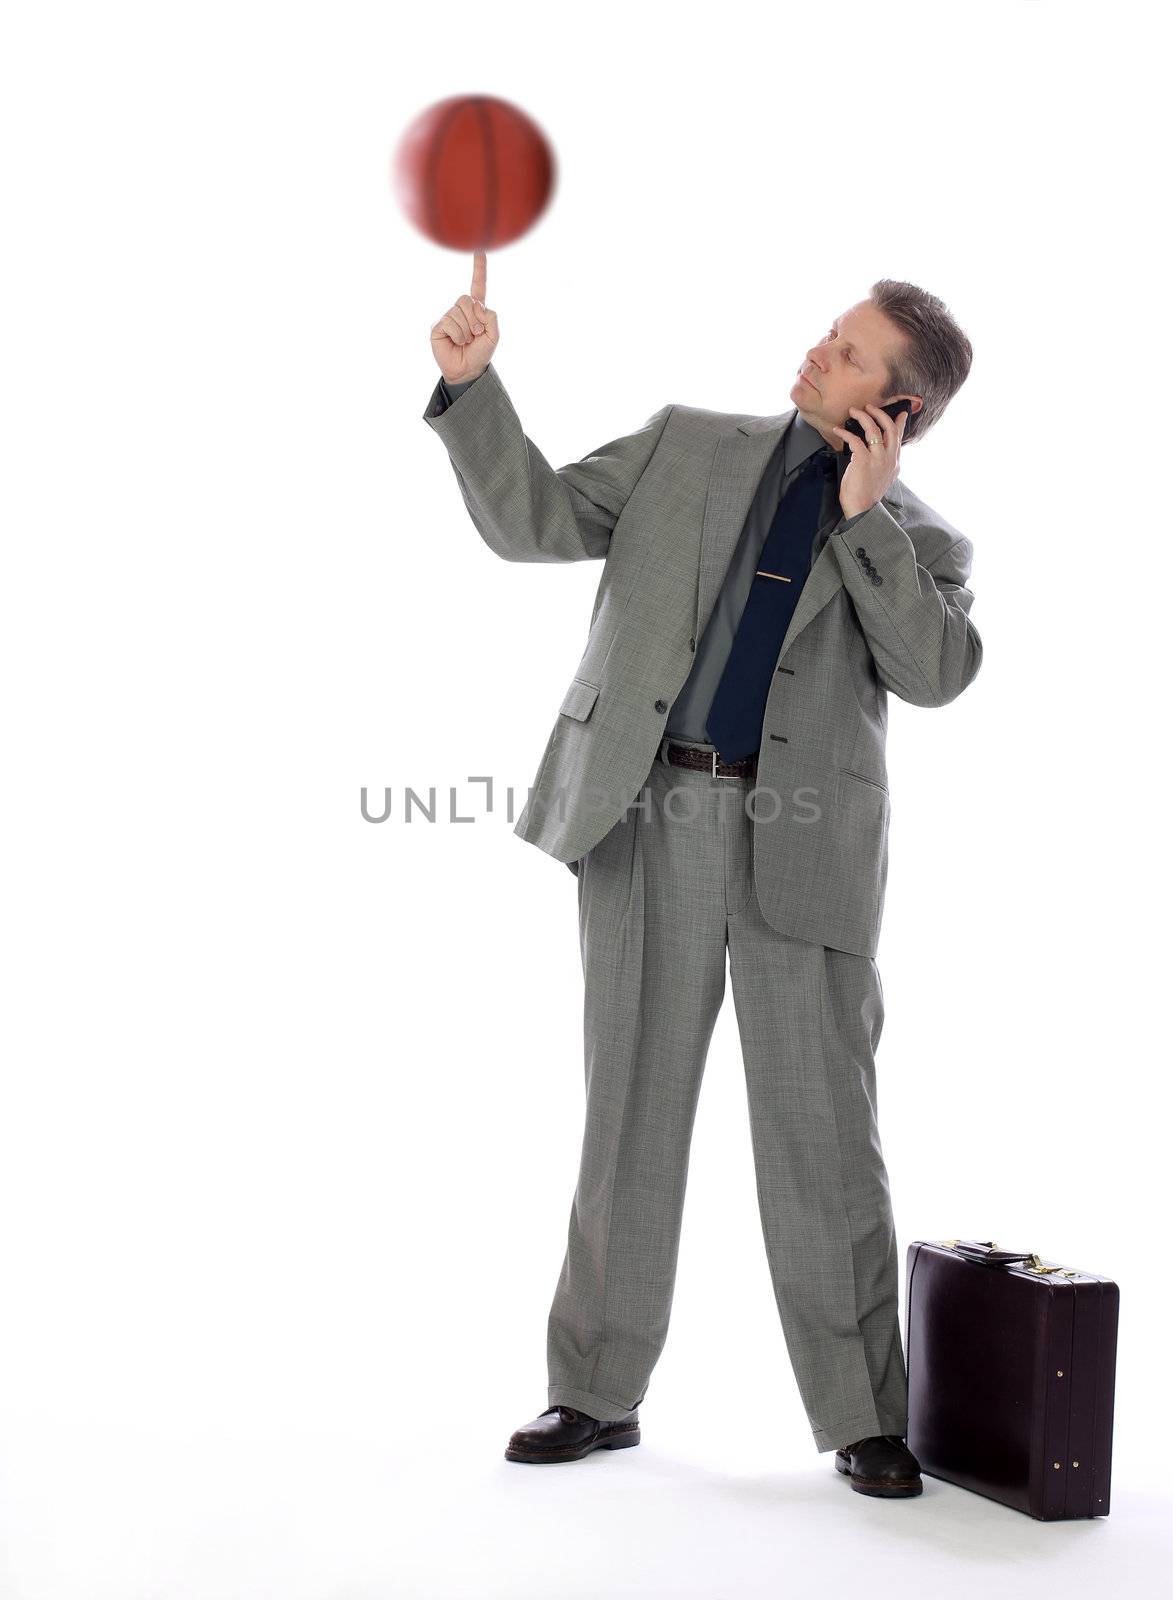 A business man spins a basketball on his finger showing multitasking skills